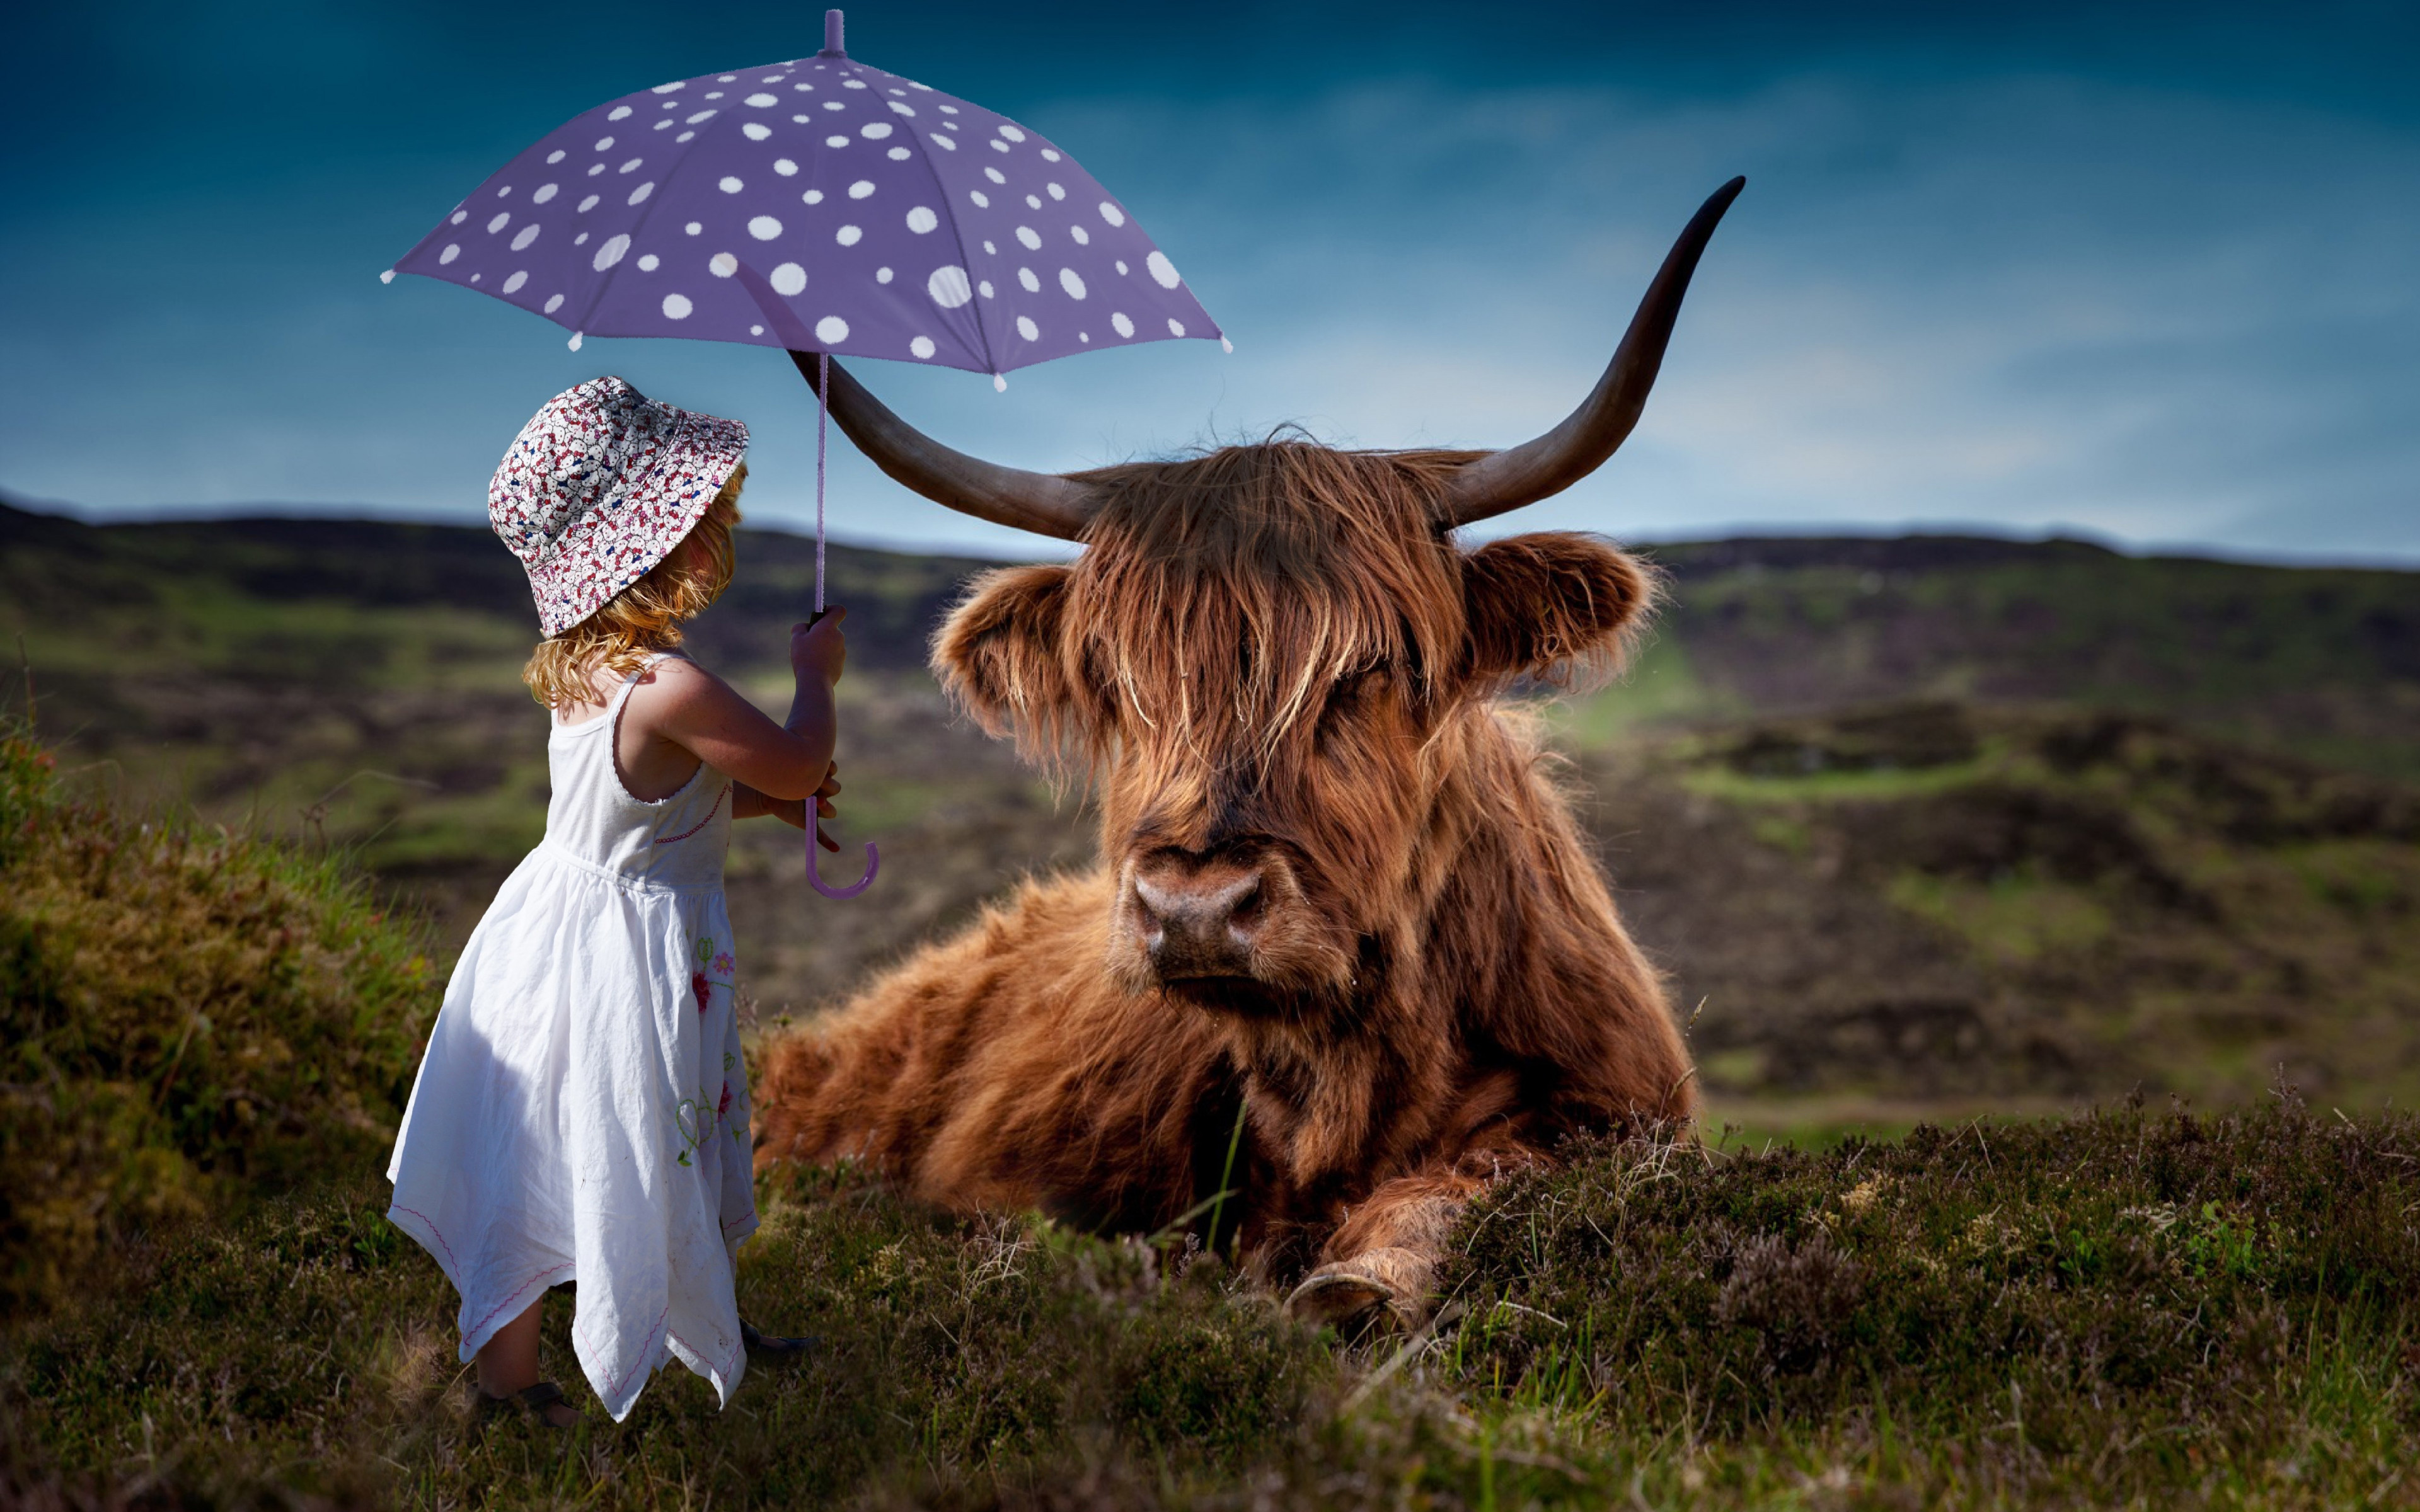 Child with the umbrella and the funny cow wallpaper 3840x2400